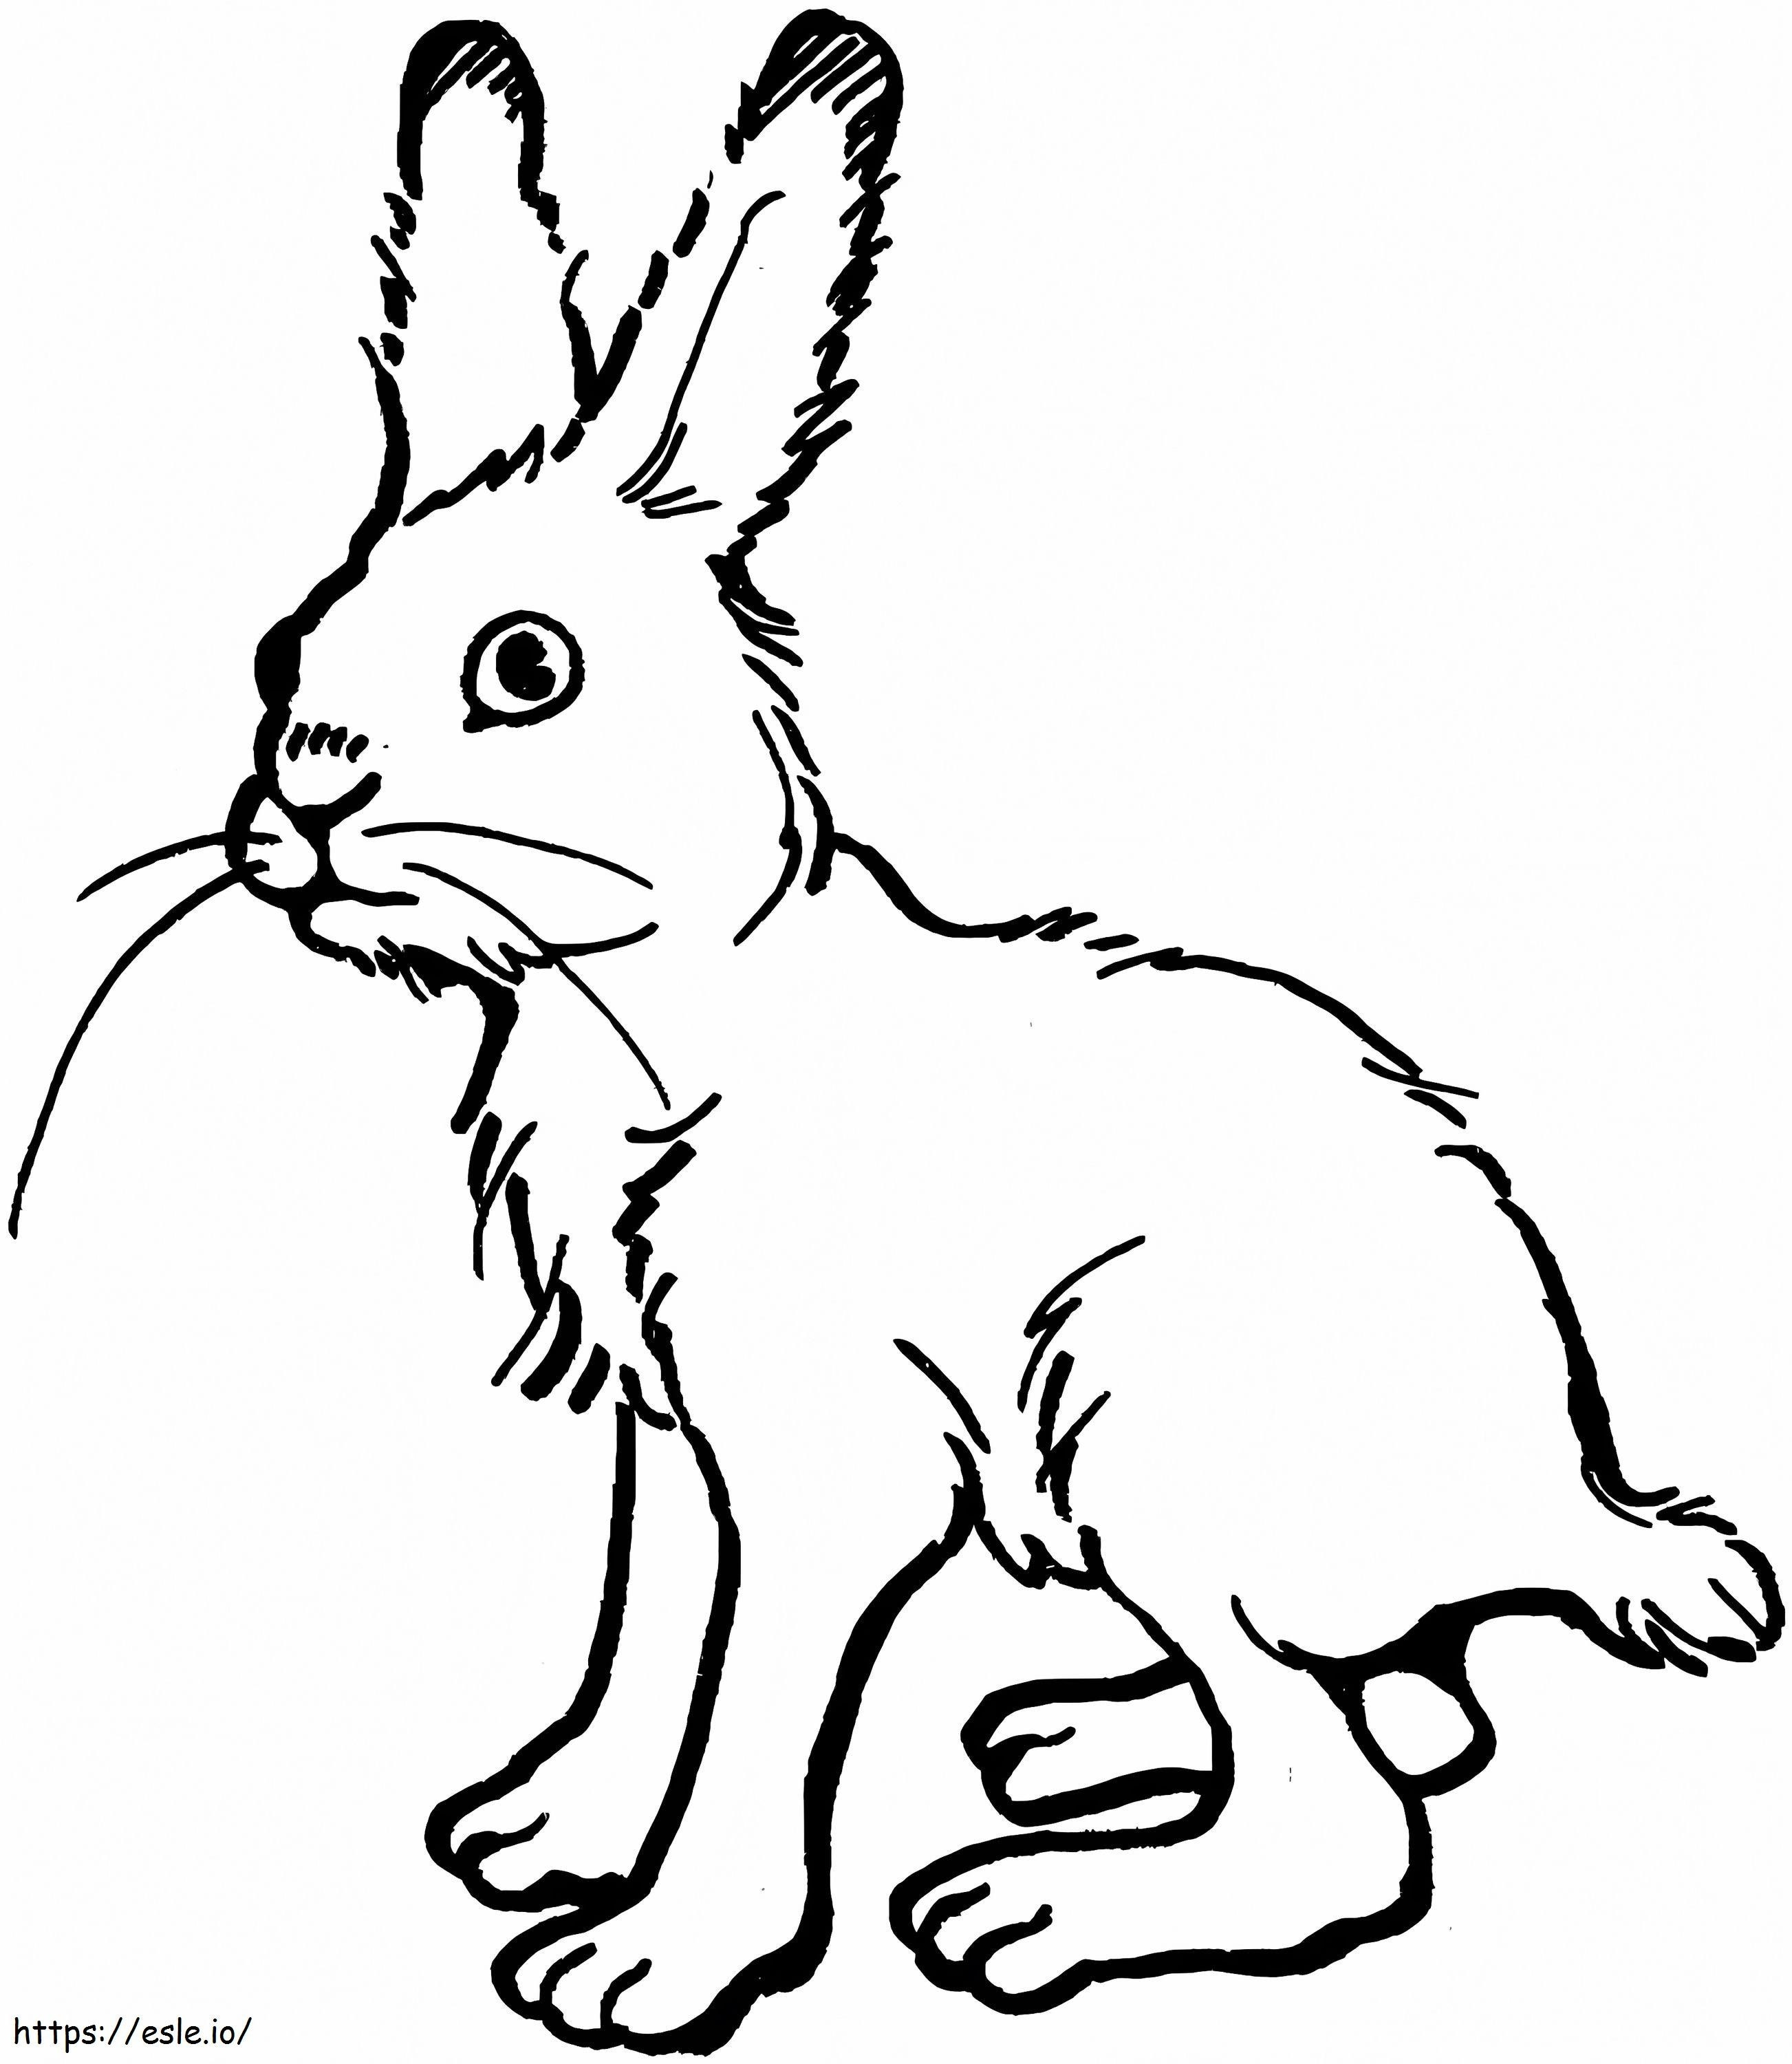 Uggly Rabbit coloring page